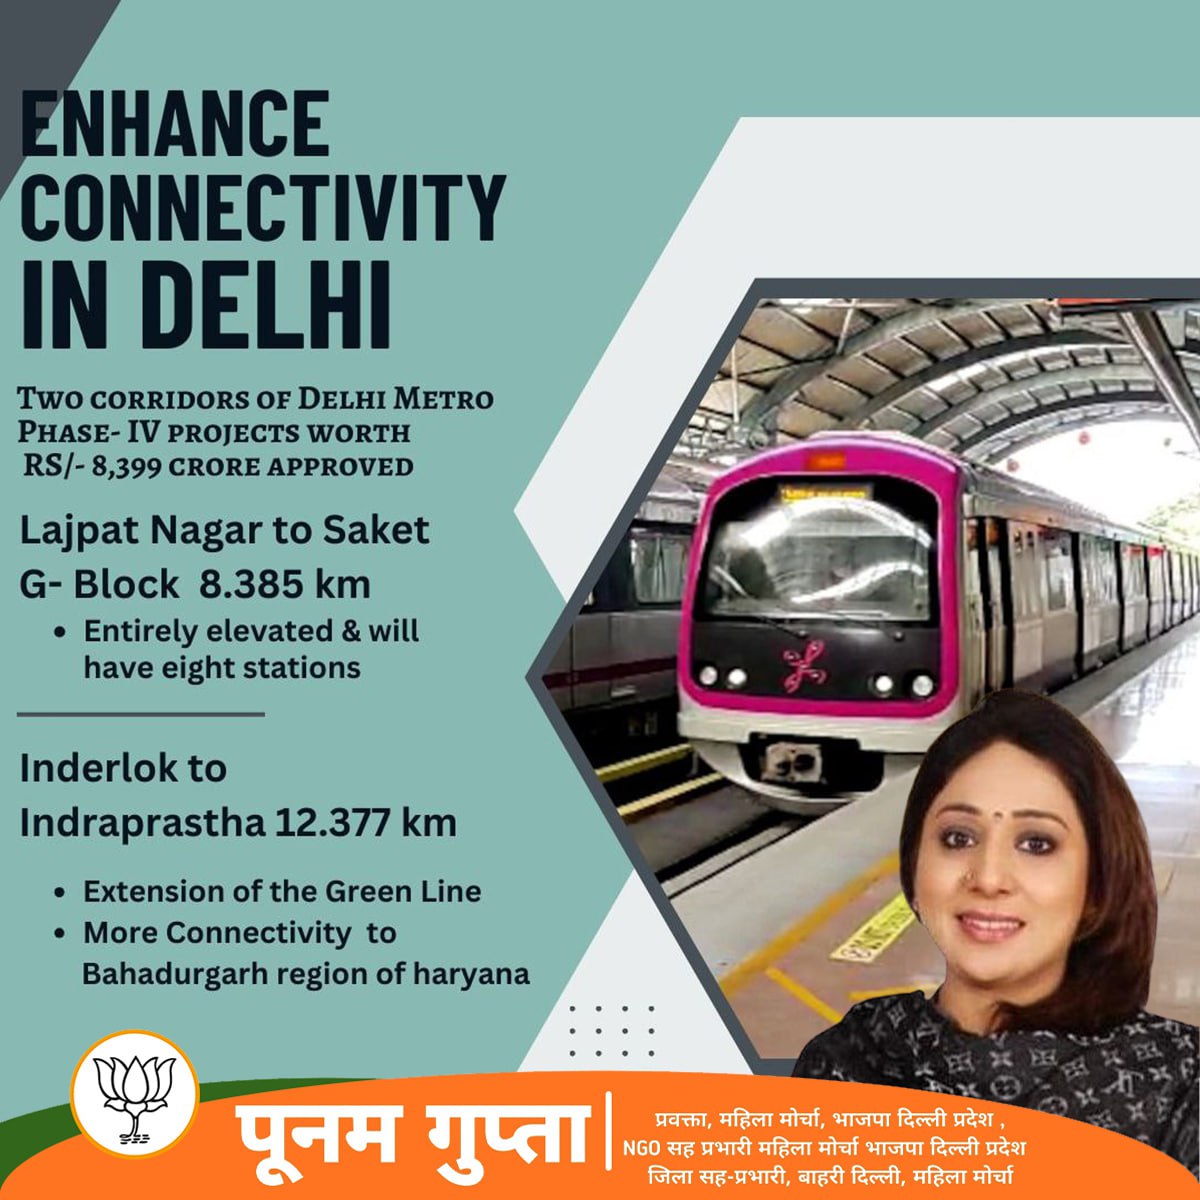 Delhi! Your commute just got easier as the Cabinet has approved two new Metro corridors in Phase-IV: Lajpat Nagar to Saket G-Block and the Green Line extension to Bahadurgarh. 

#DelhiMetro #DMRC #CabinetDecisions